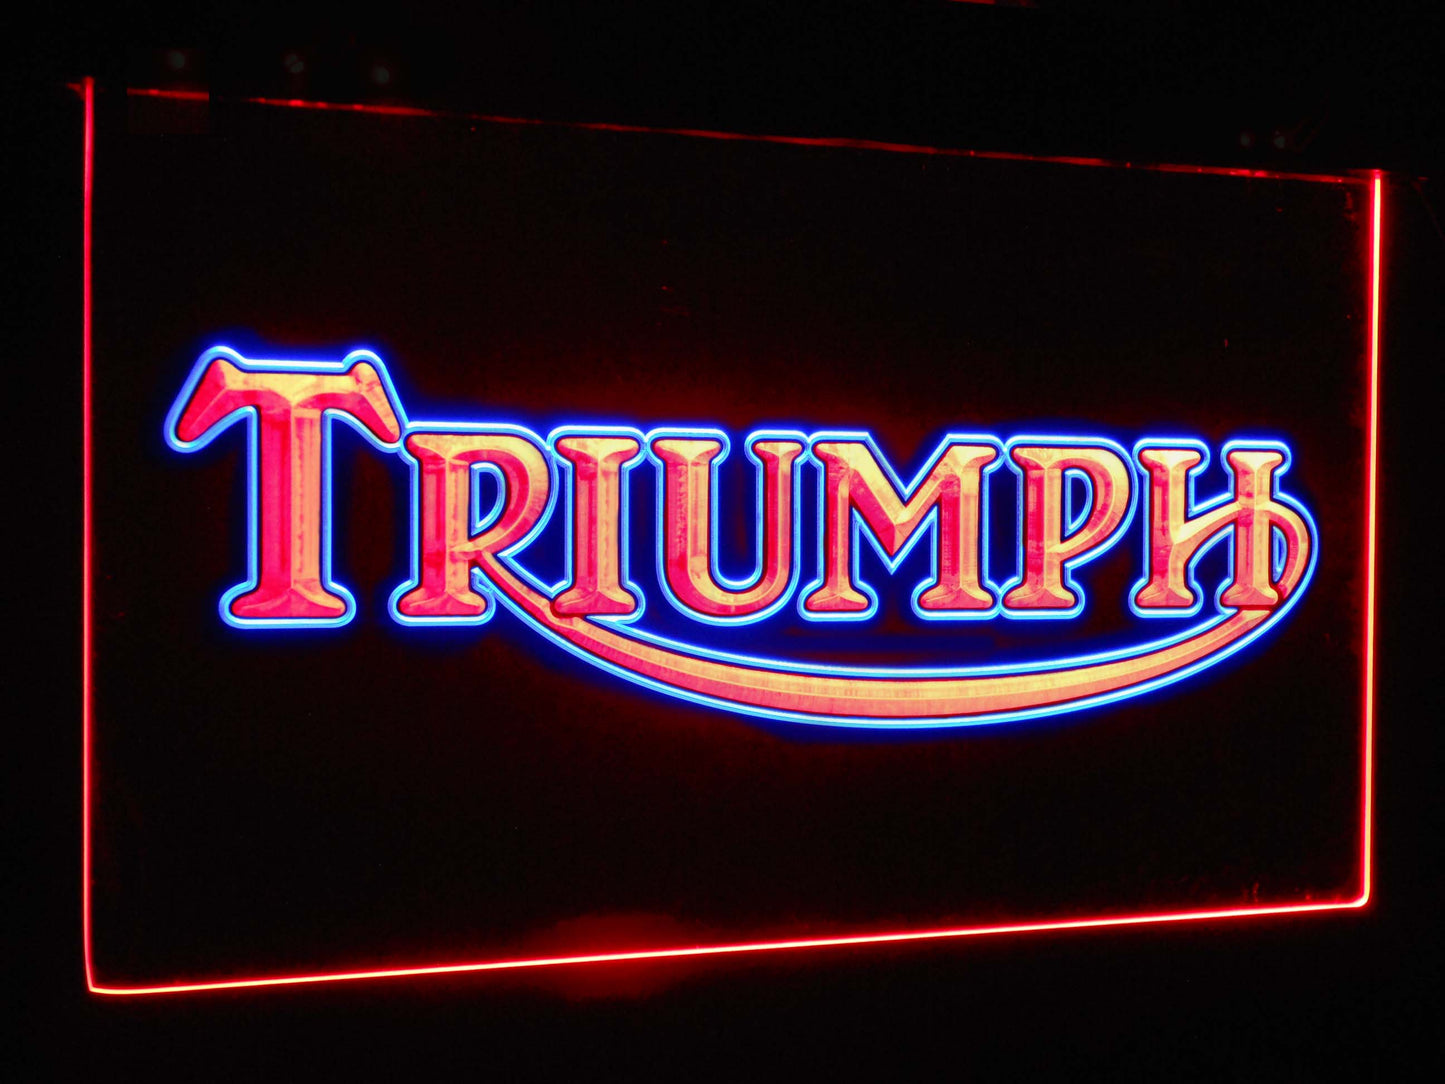 Triumph Car Truck Bar Decoration Gift Dual Color Led Neon Light Signs st6-d0051 by Woody Signs Co. - Handmade Crafted Unique Wooden Creative